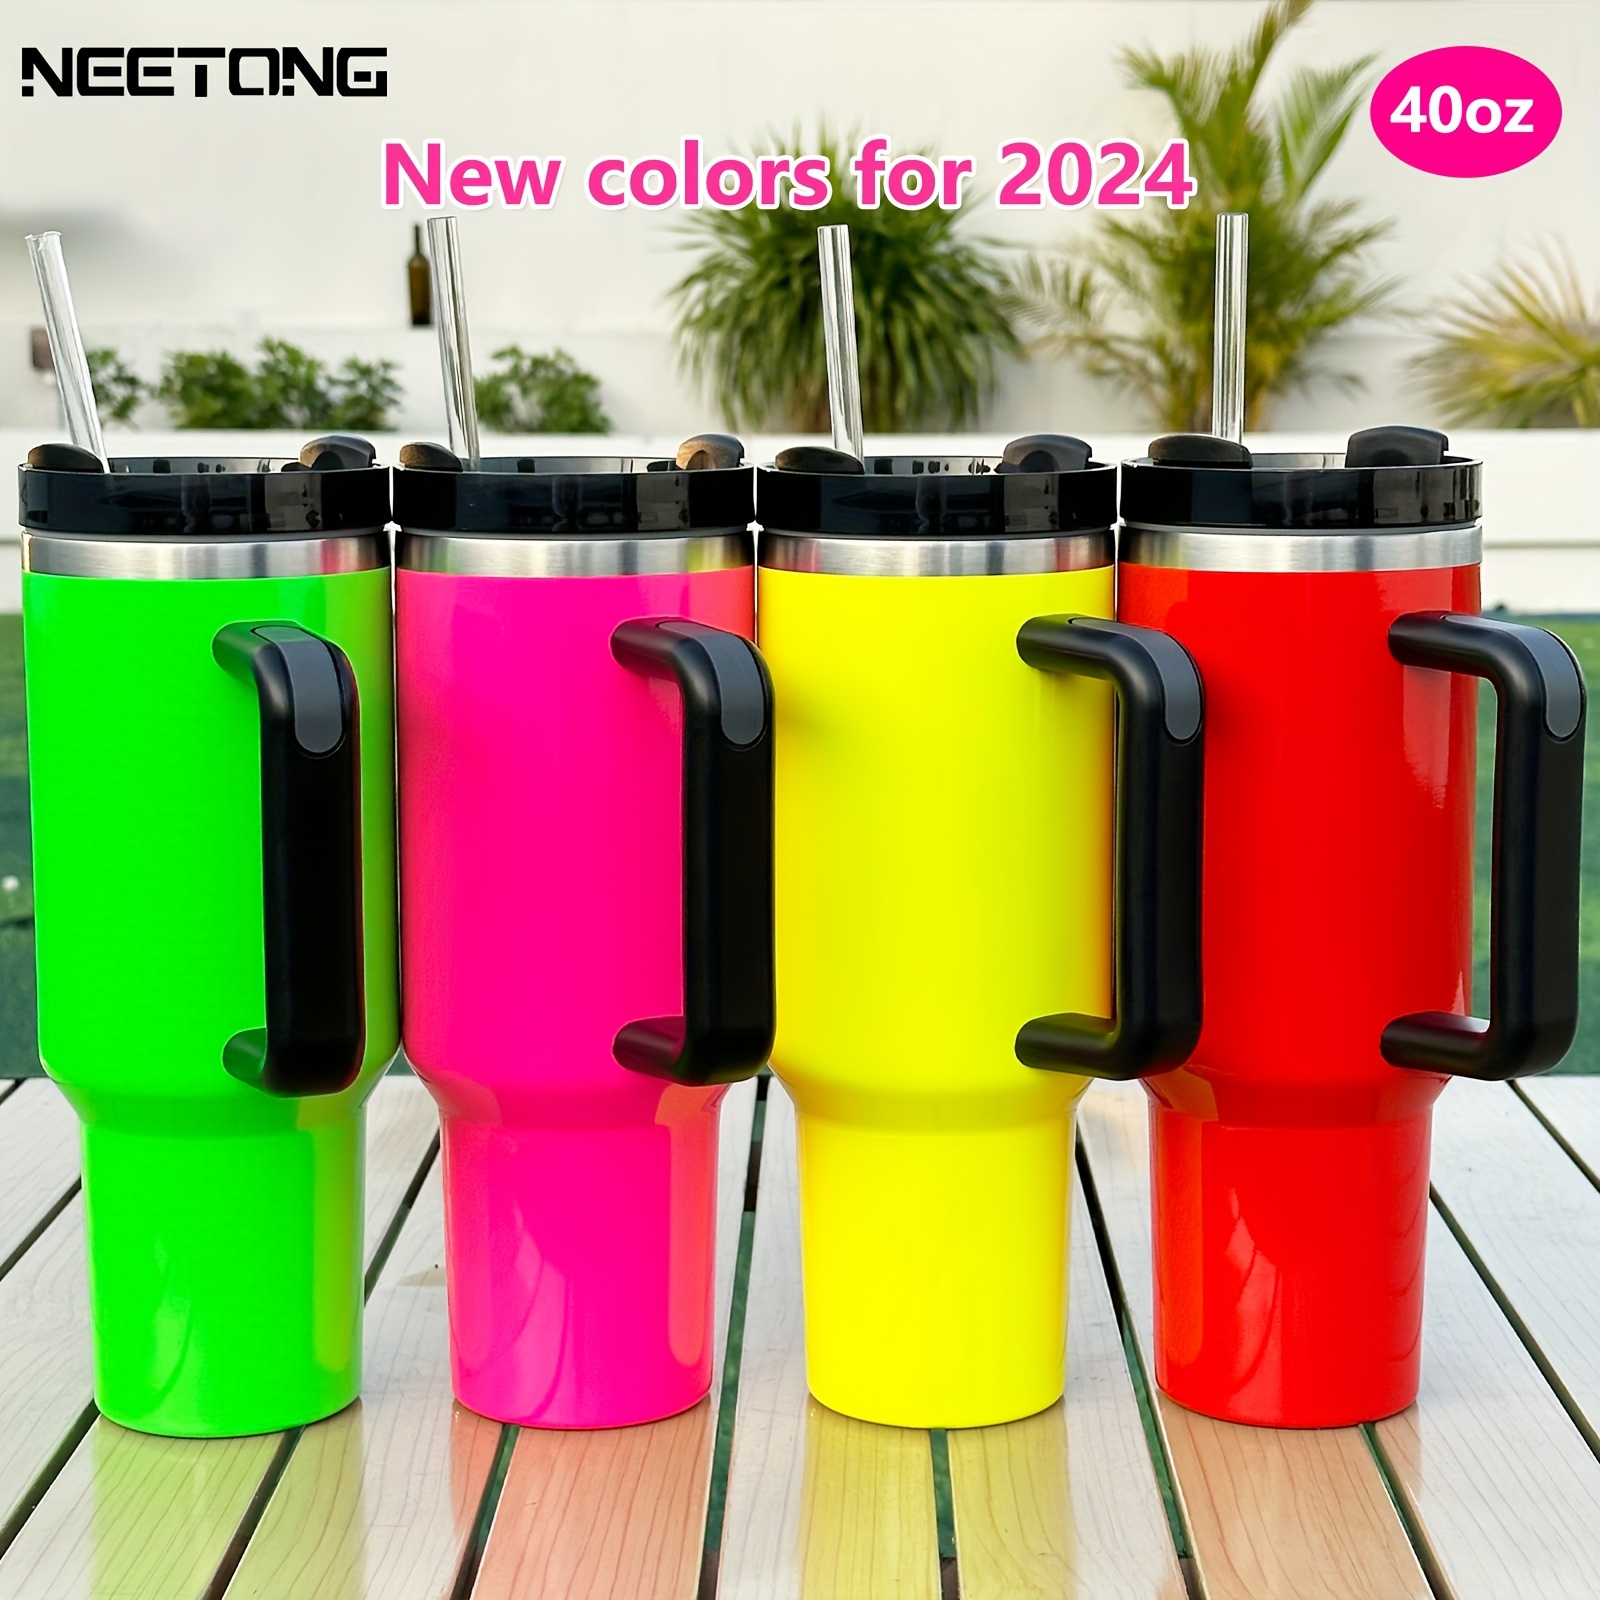 

1pc, Fluorescent Color Tumbler With Lid, 40oz Insulated Water Bottle With Handle, Portable Drinking Cups, For Car, Home, Office, Summer Drinkware, Travel Accessories, Birthday Gifts